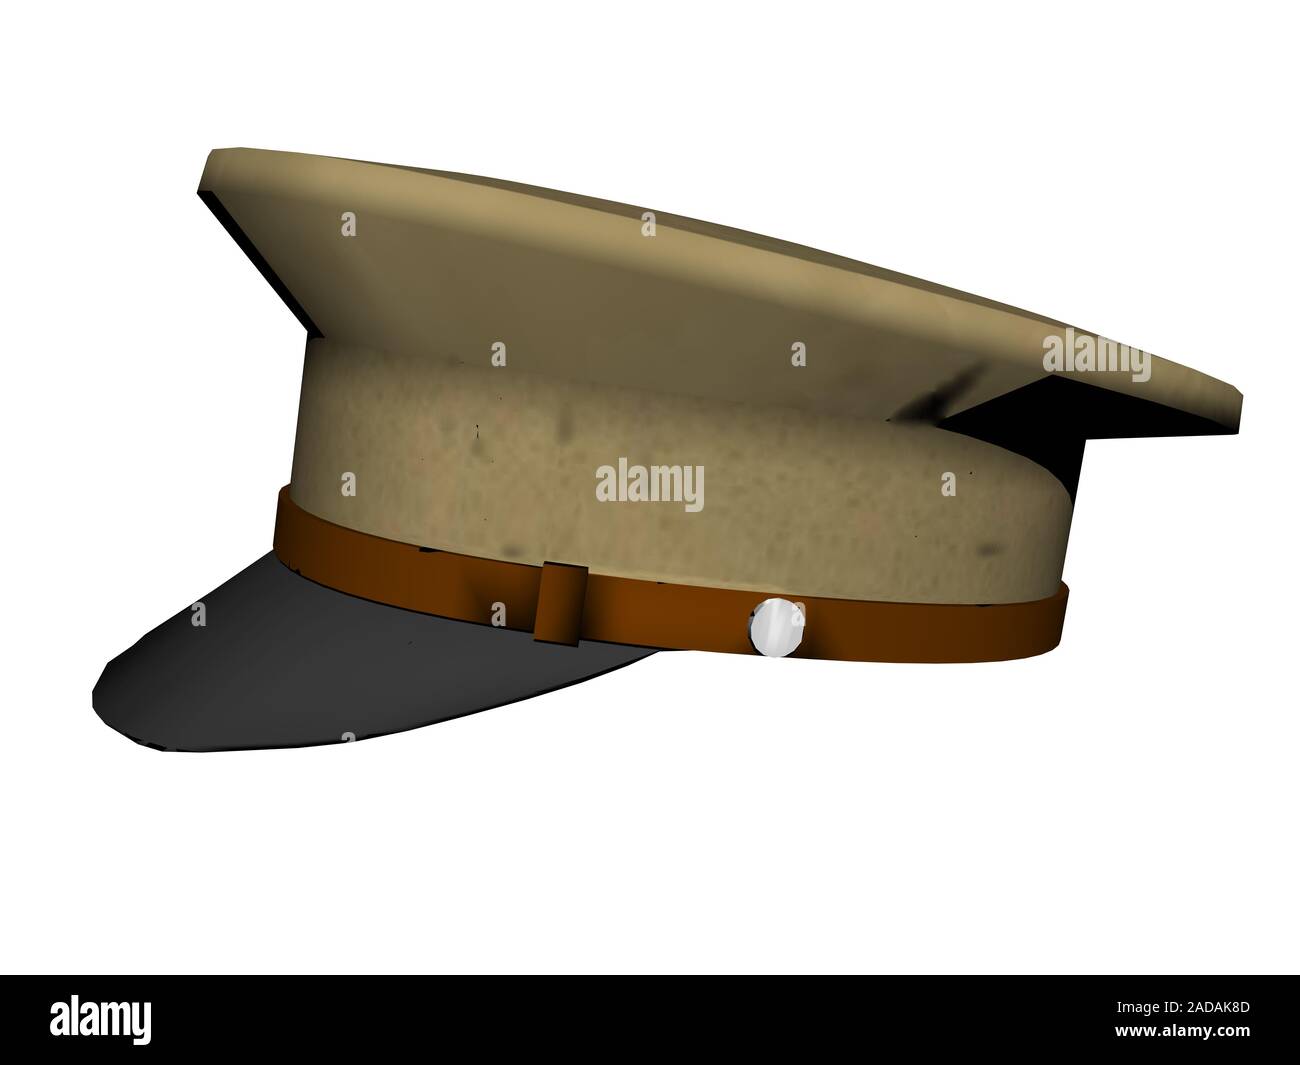 military peaked cap with hatband Stock Photo